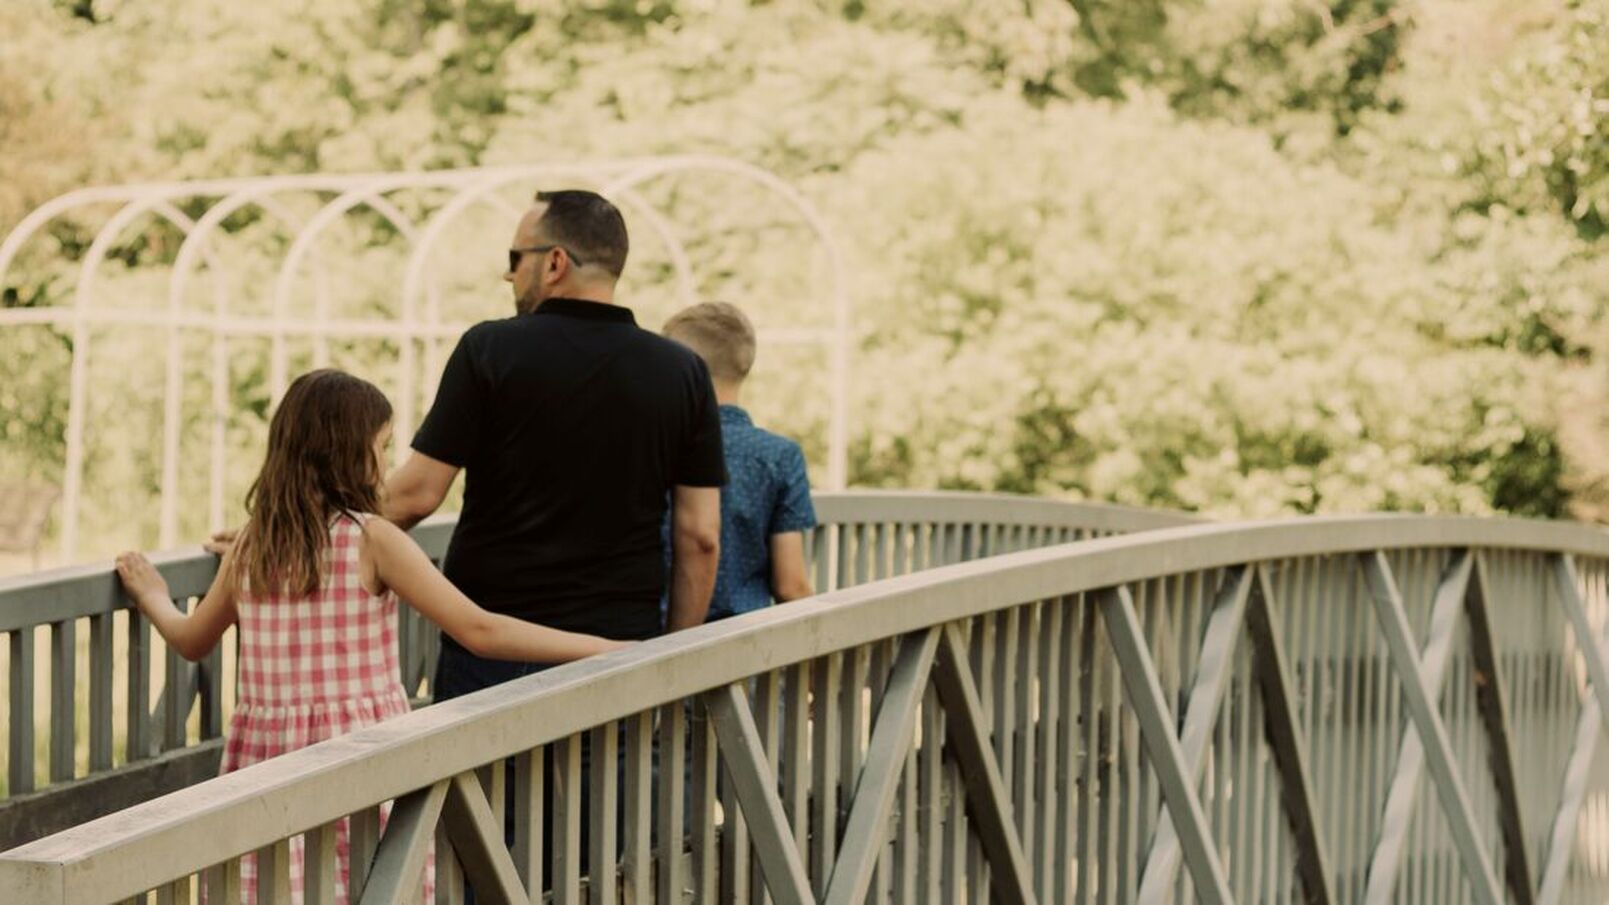 Here is a man and two children crossing one of the bridges at Waterworks Park. The girl is wearing a white and red checkered dress. The man is wearing a black shirt with sunglasses. In front is a boy wearing a blue and white patterned shirt. In the back are many trees.